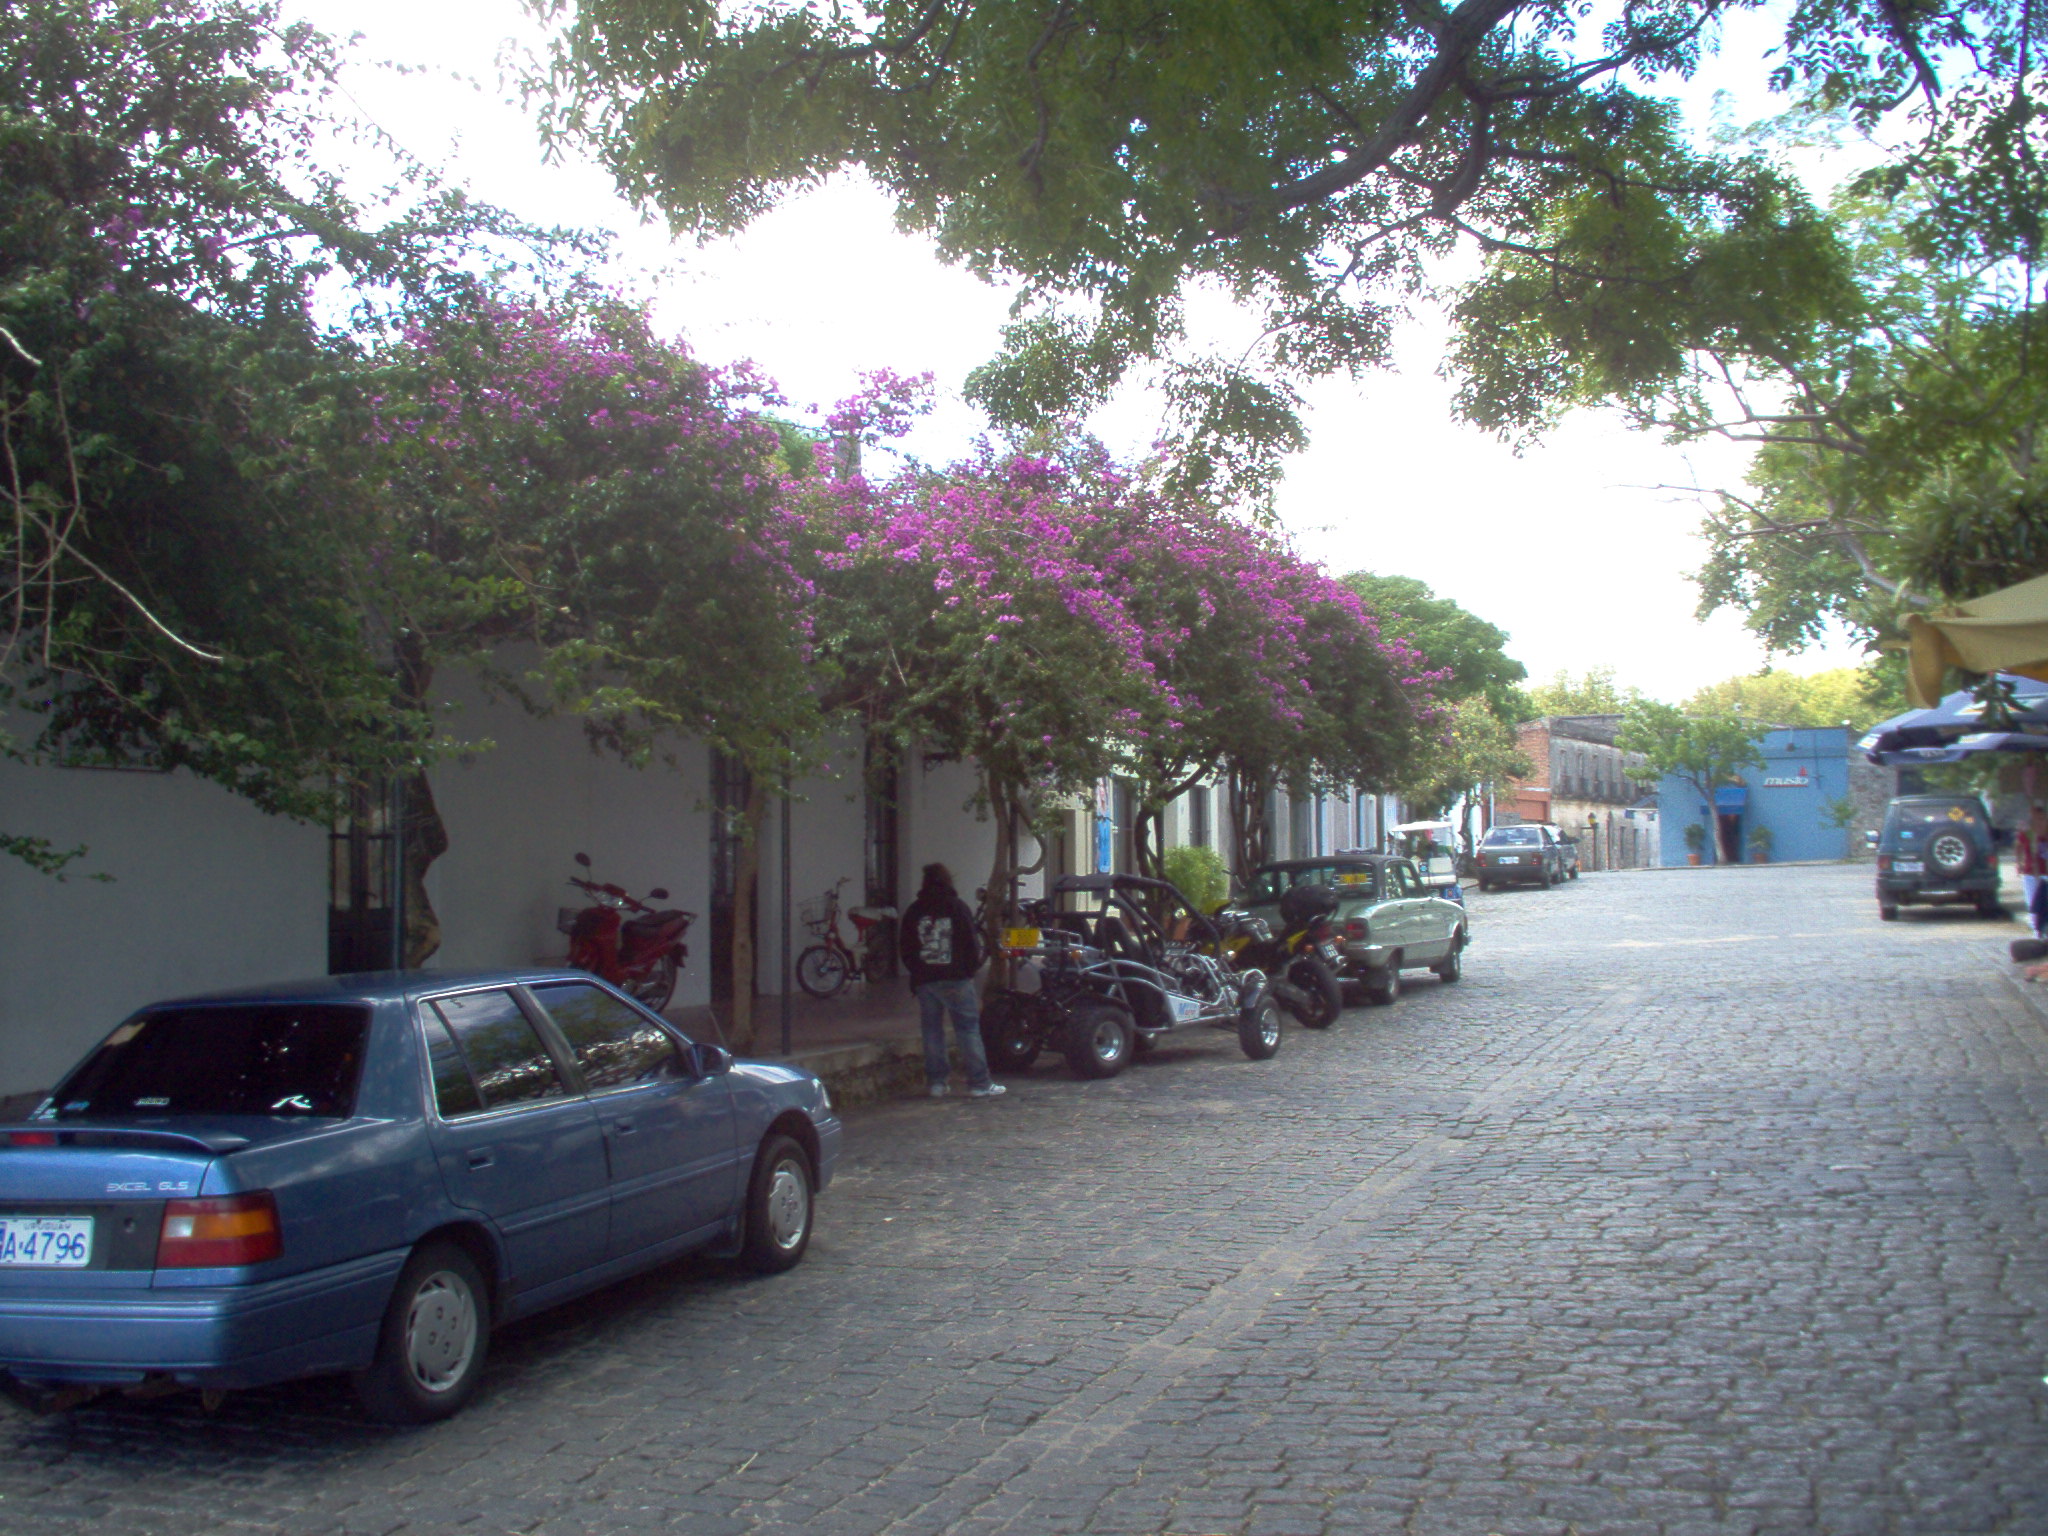 motorcycles and cars parked on the street in a neighborhood